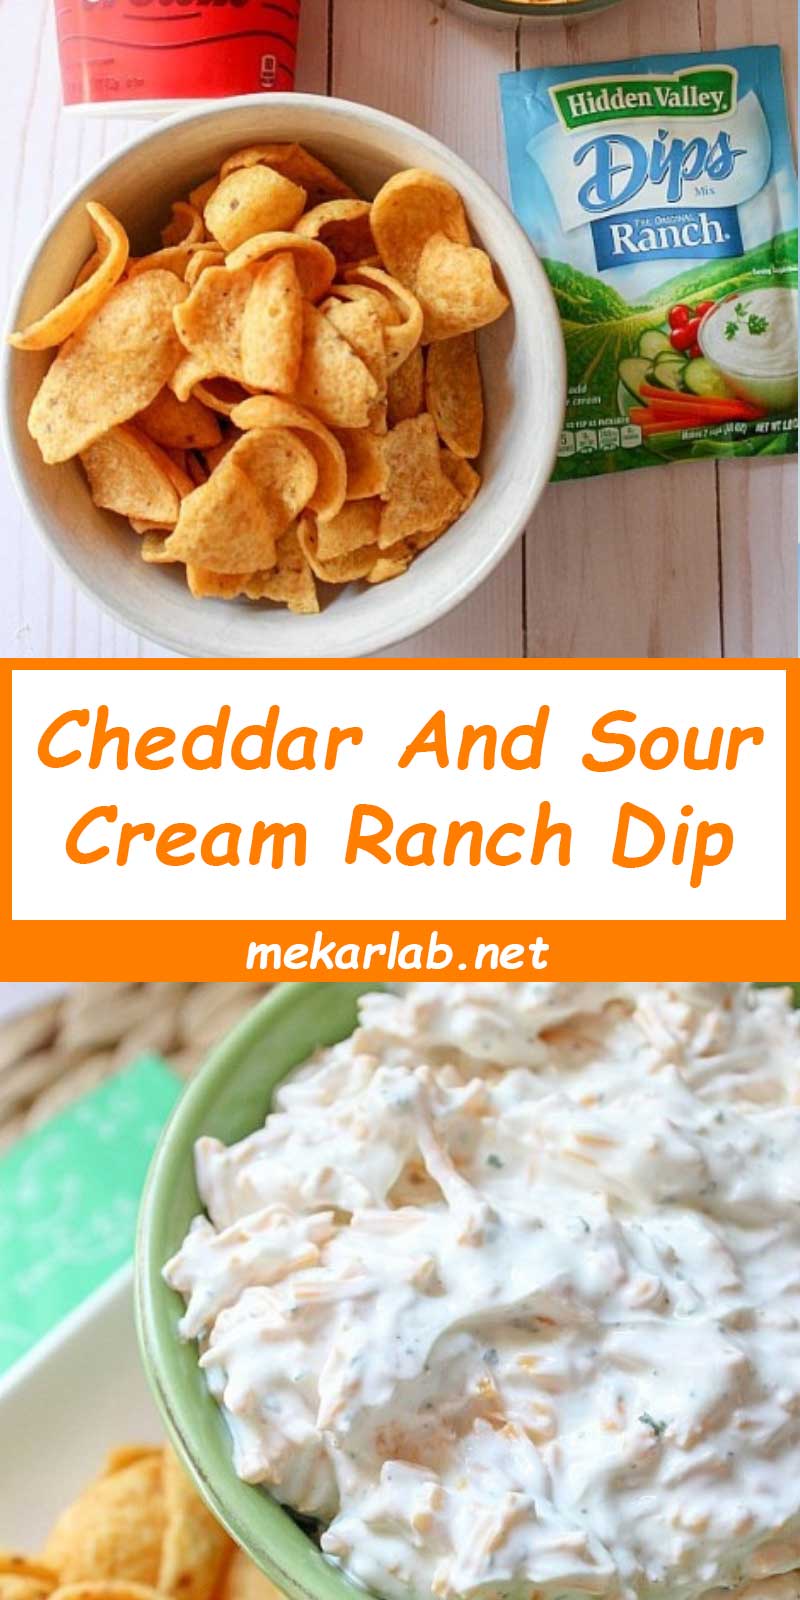 Cheddar And Sour Cream Ranch Dip